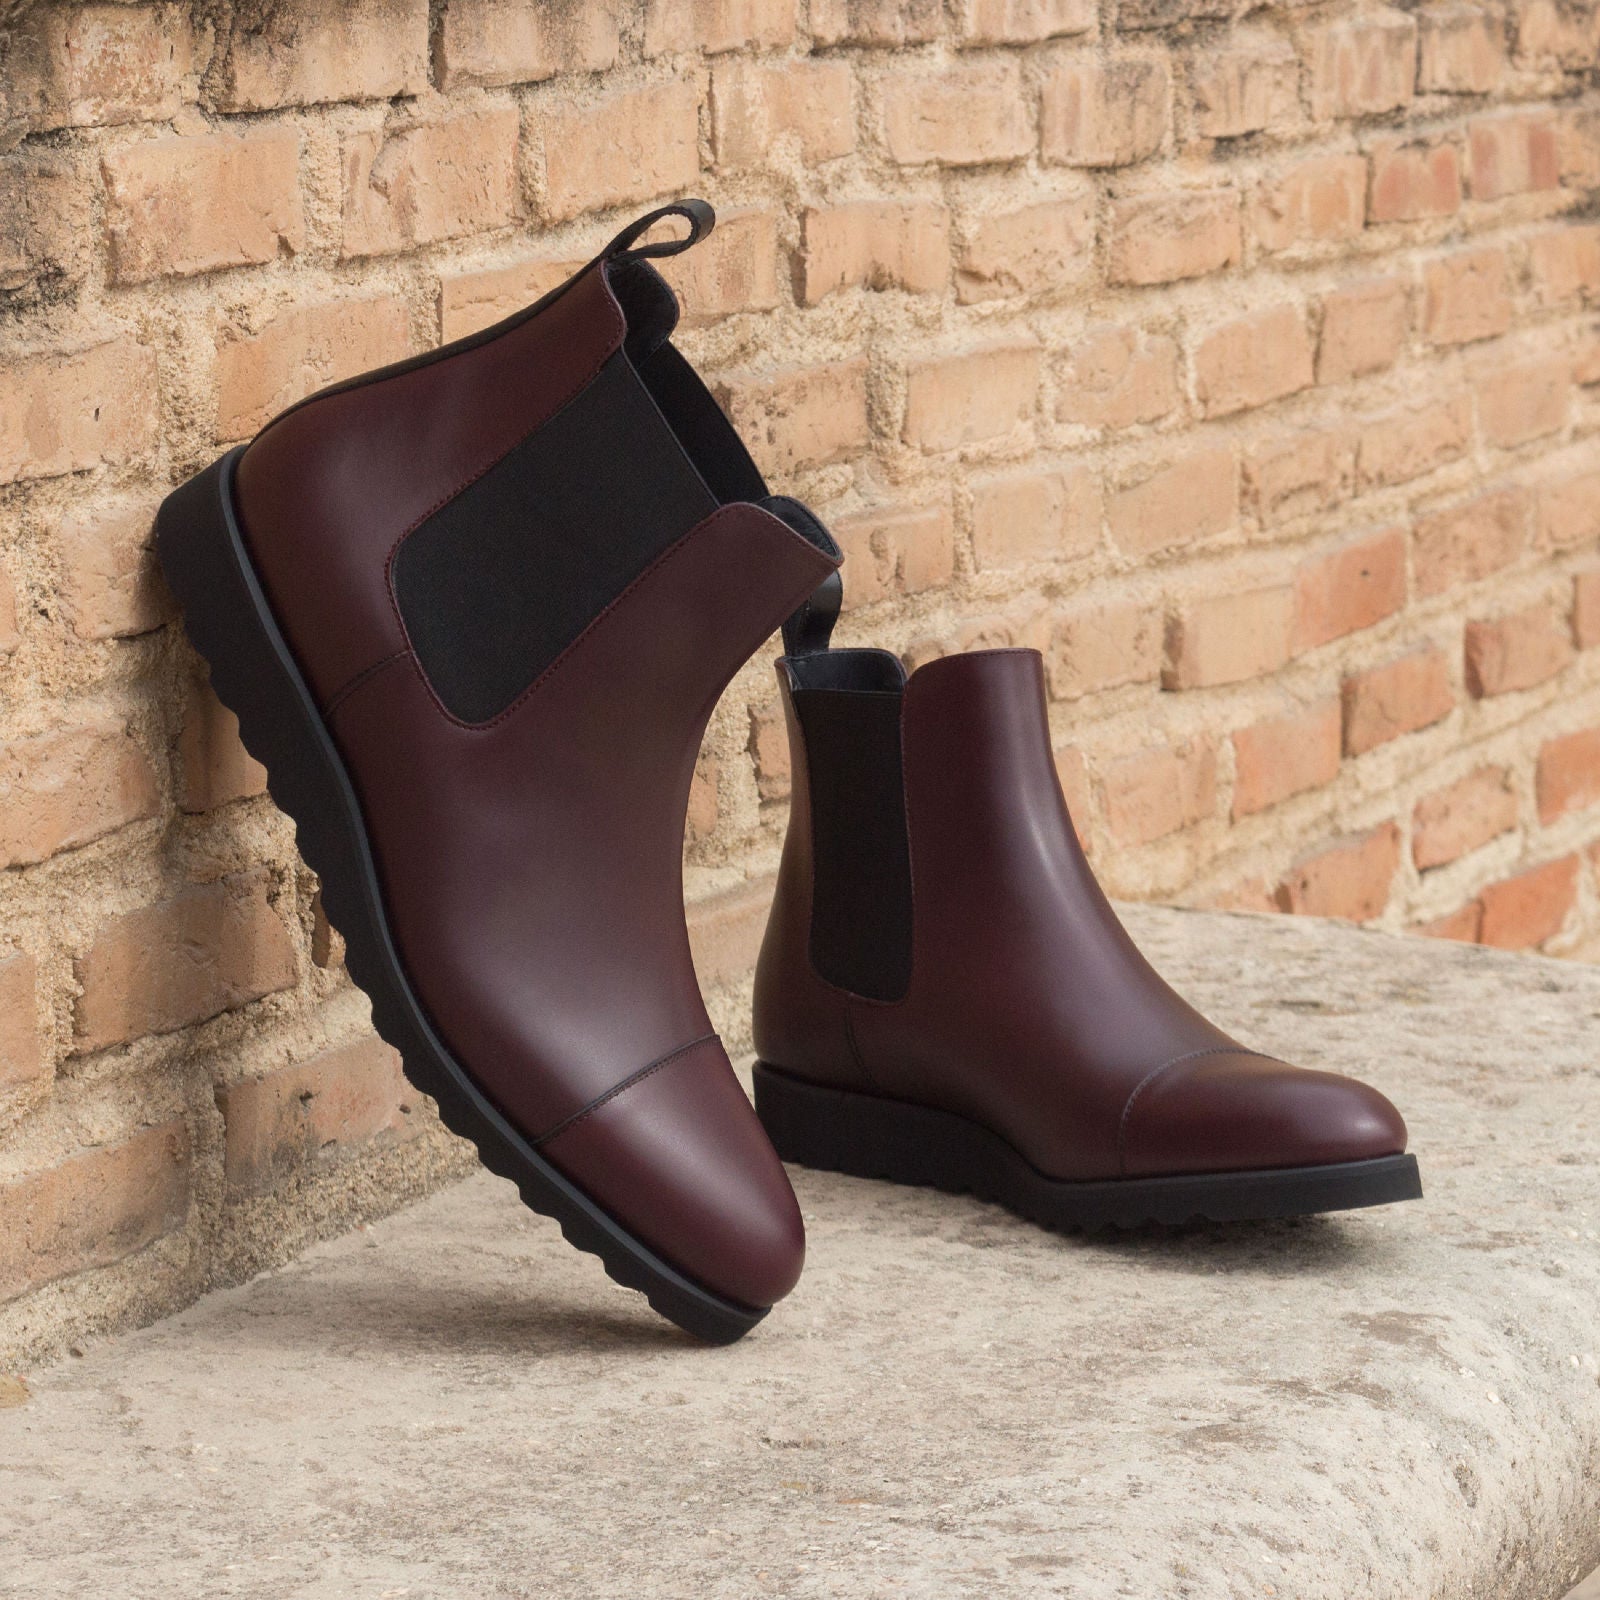 Burgundy Chelsea Boot with Sport Wedge